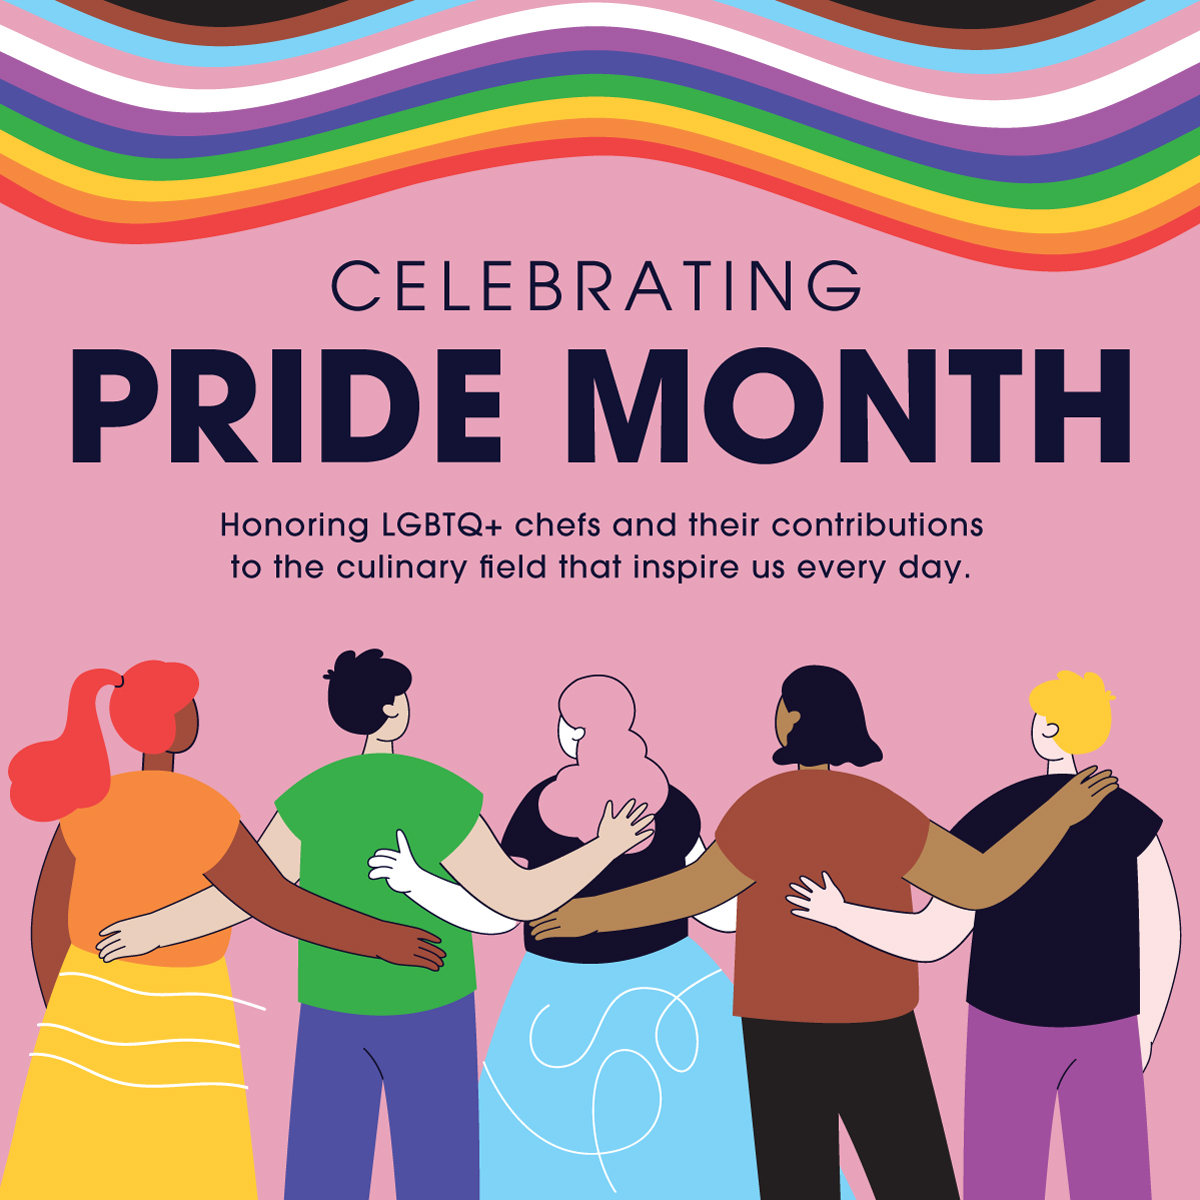 We’re celebrating #PrideMonth by recognizing LGBTQ+ chefs who have had a major impact on our guests, our organization, and in their communities. Stay tuned as we highlight our friends & teammates throughout the month! #AramarkPride #PursueWhatMatters